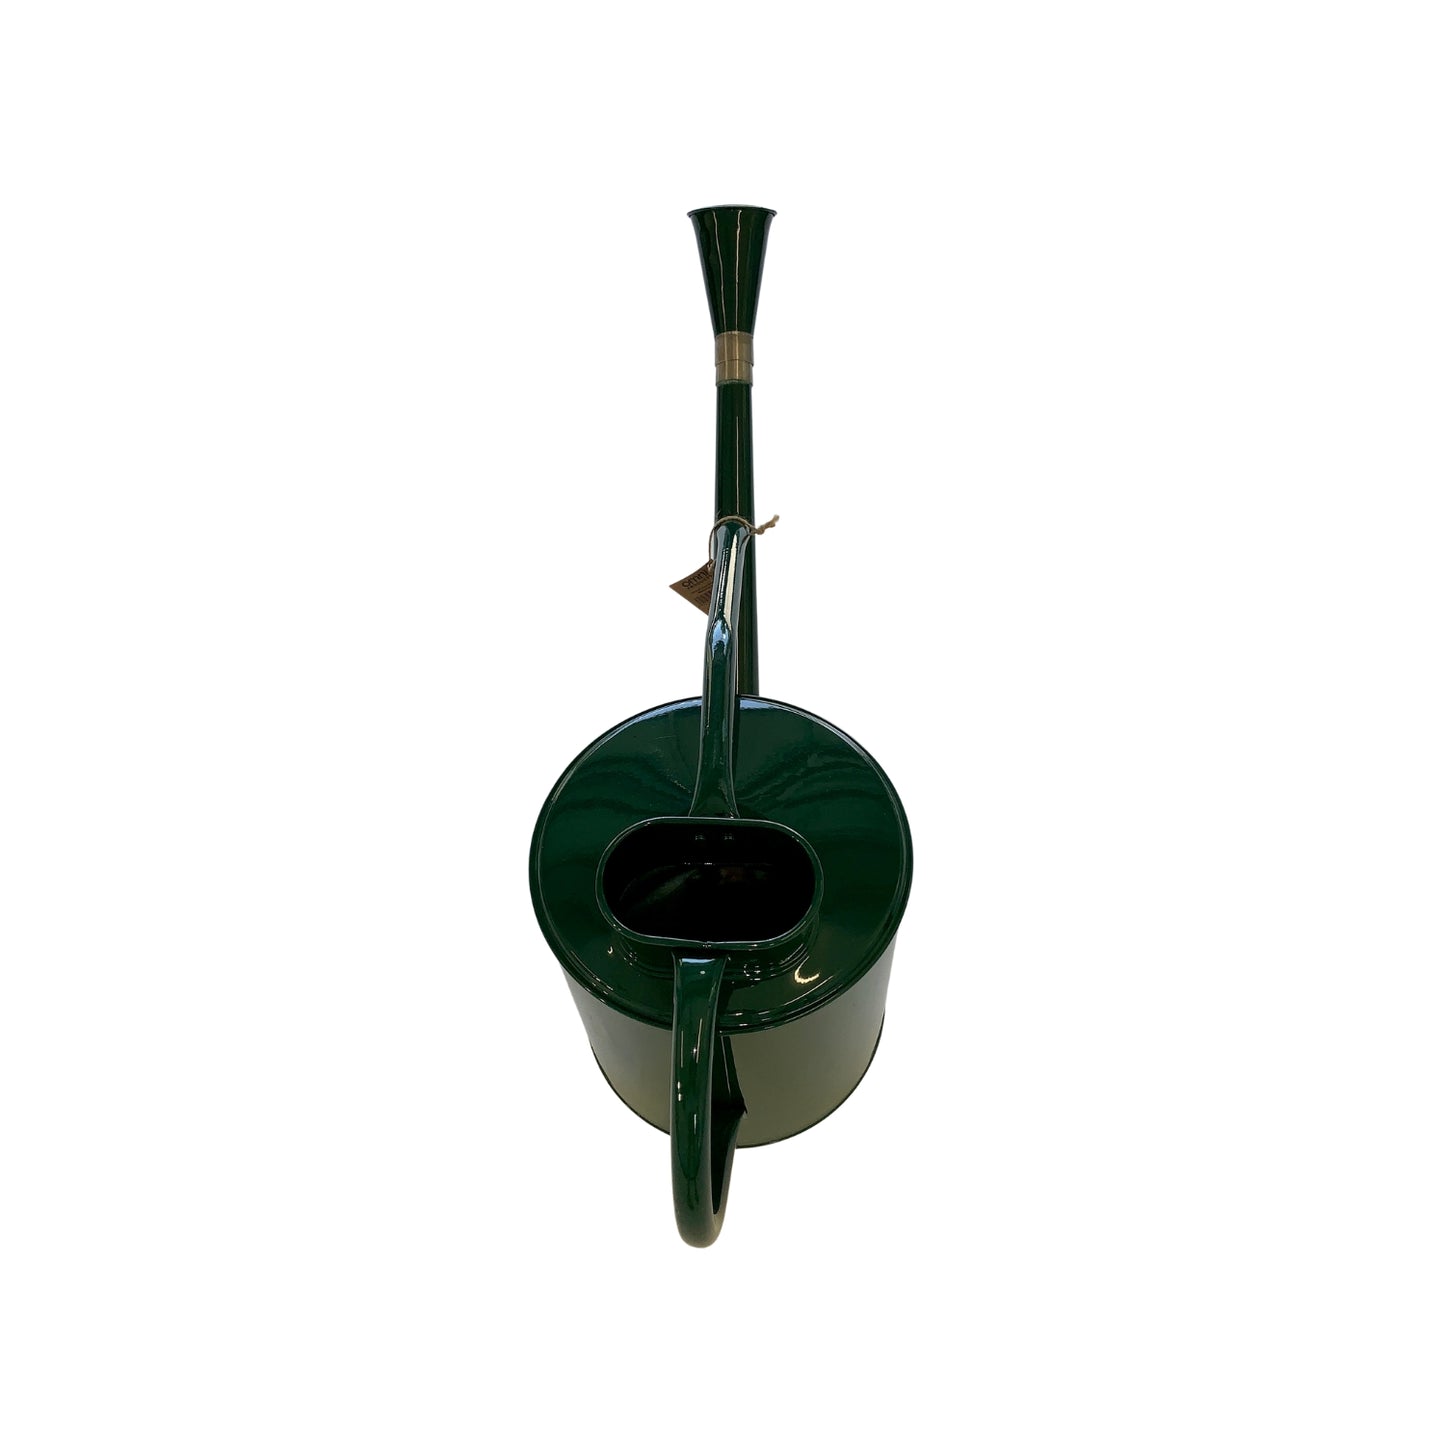 OMNI 9 LITRE ANTIQUE WATERING CAN - WC9